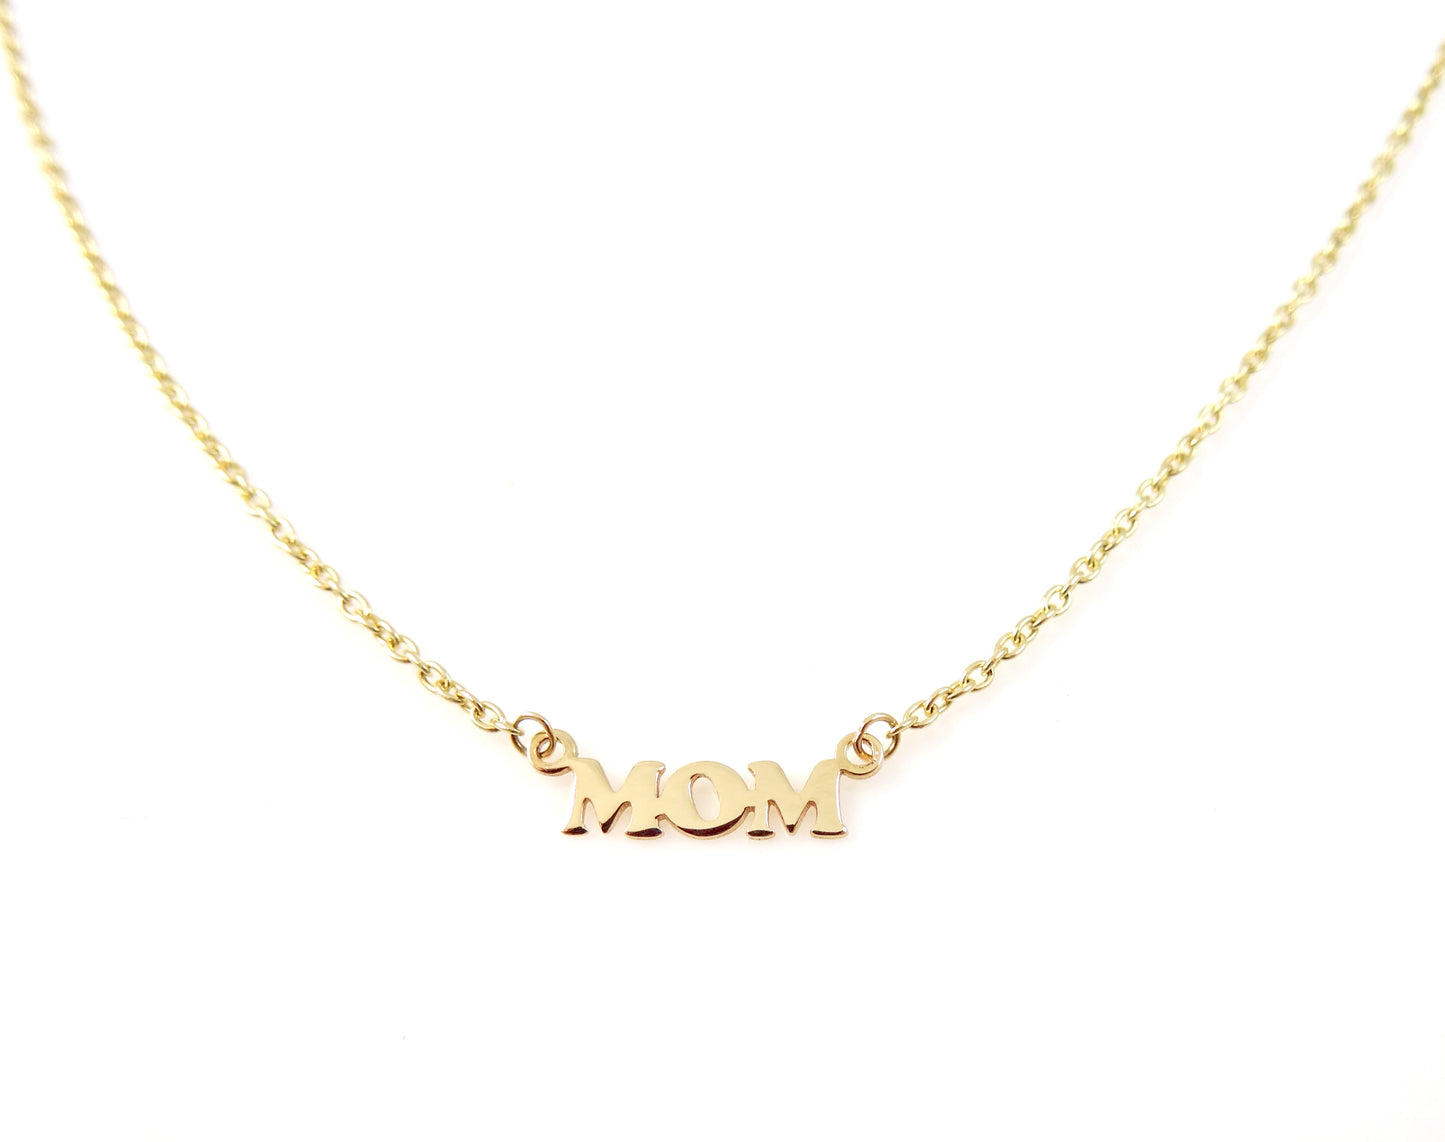 Miniature MOM Cut Out Necklace 14KY Gold